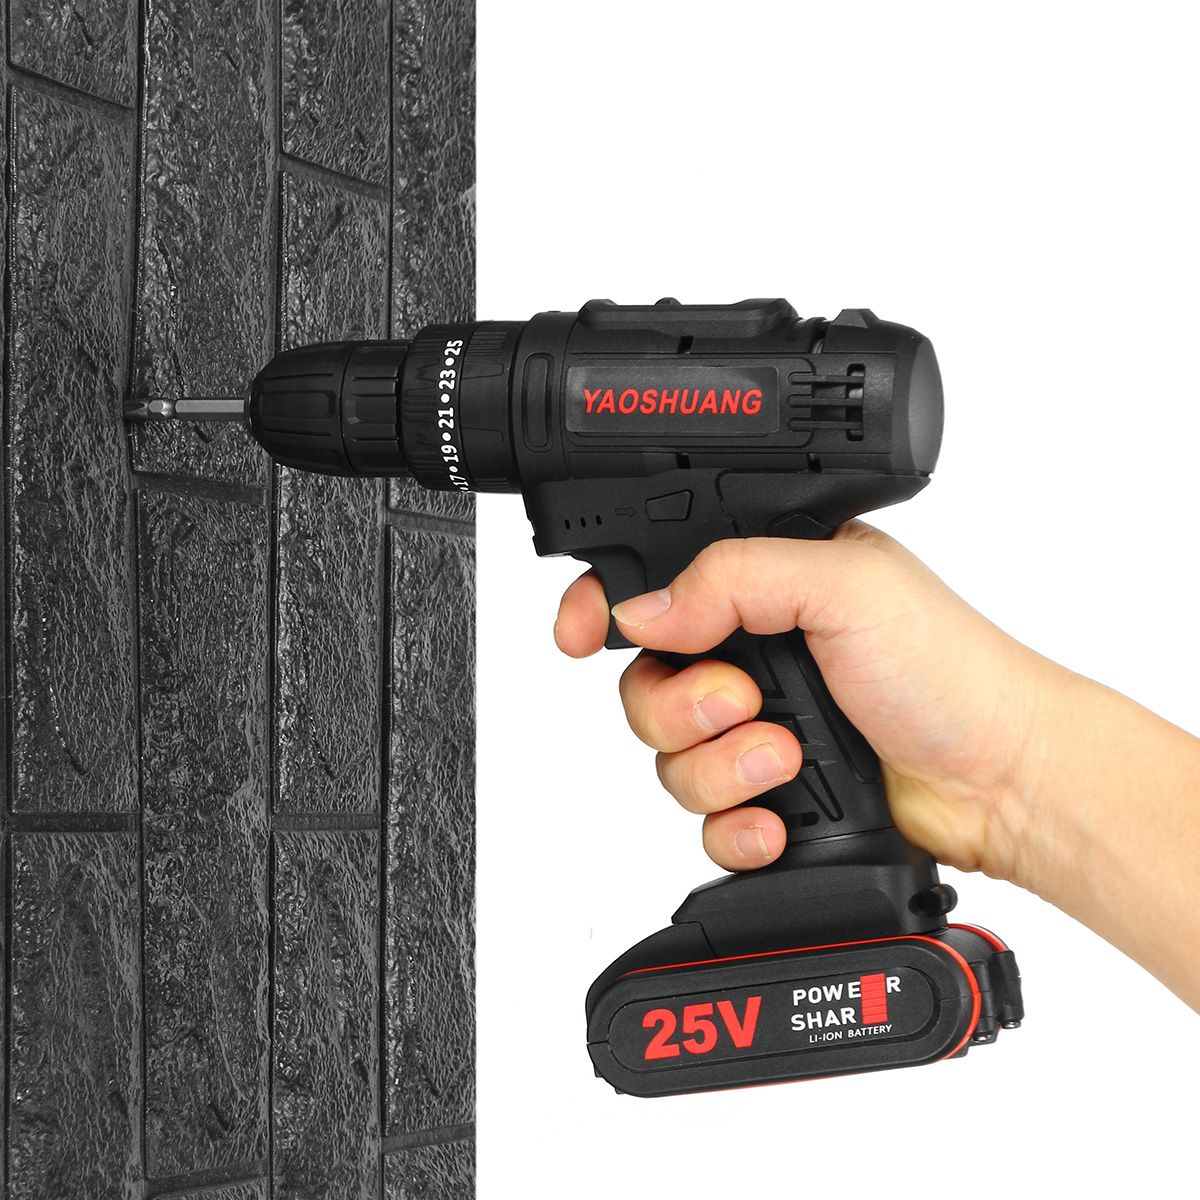 25V-38quot-Cordless-Rechargeable-Electric-Impact-Hammer-Screwdriver-Drill-Power-with-1-Battery-1632689